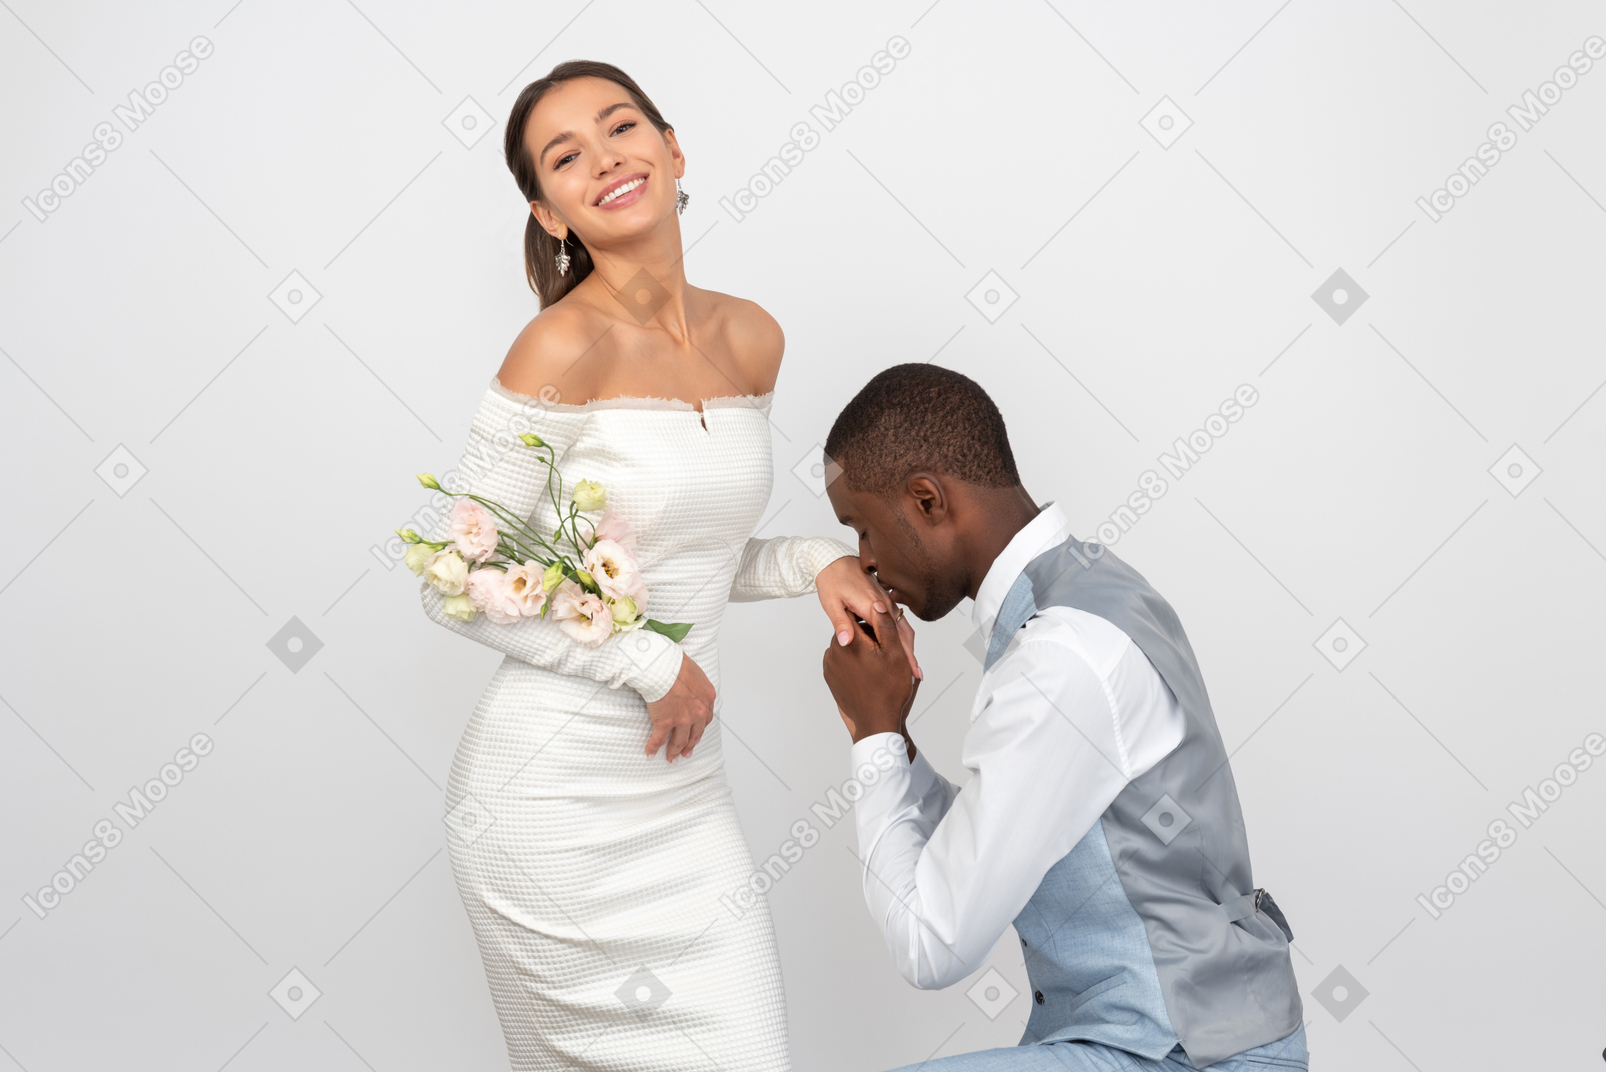 Groom kissing his bride's hand and she's holding a bouquet and smiling